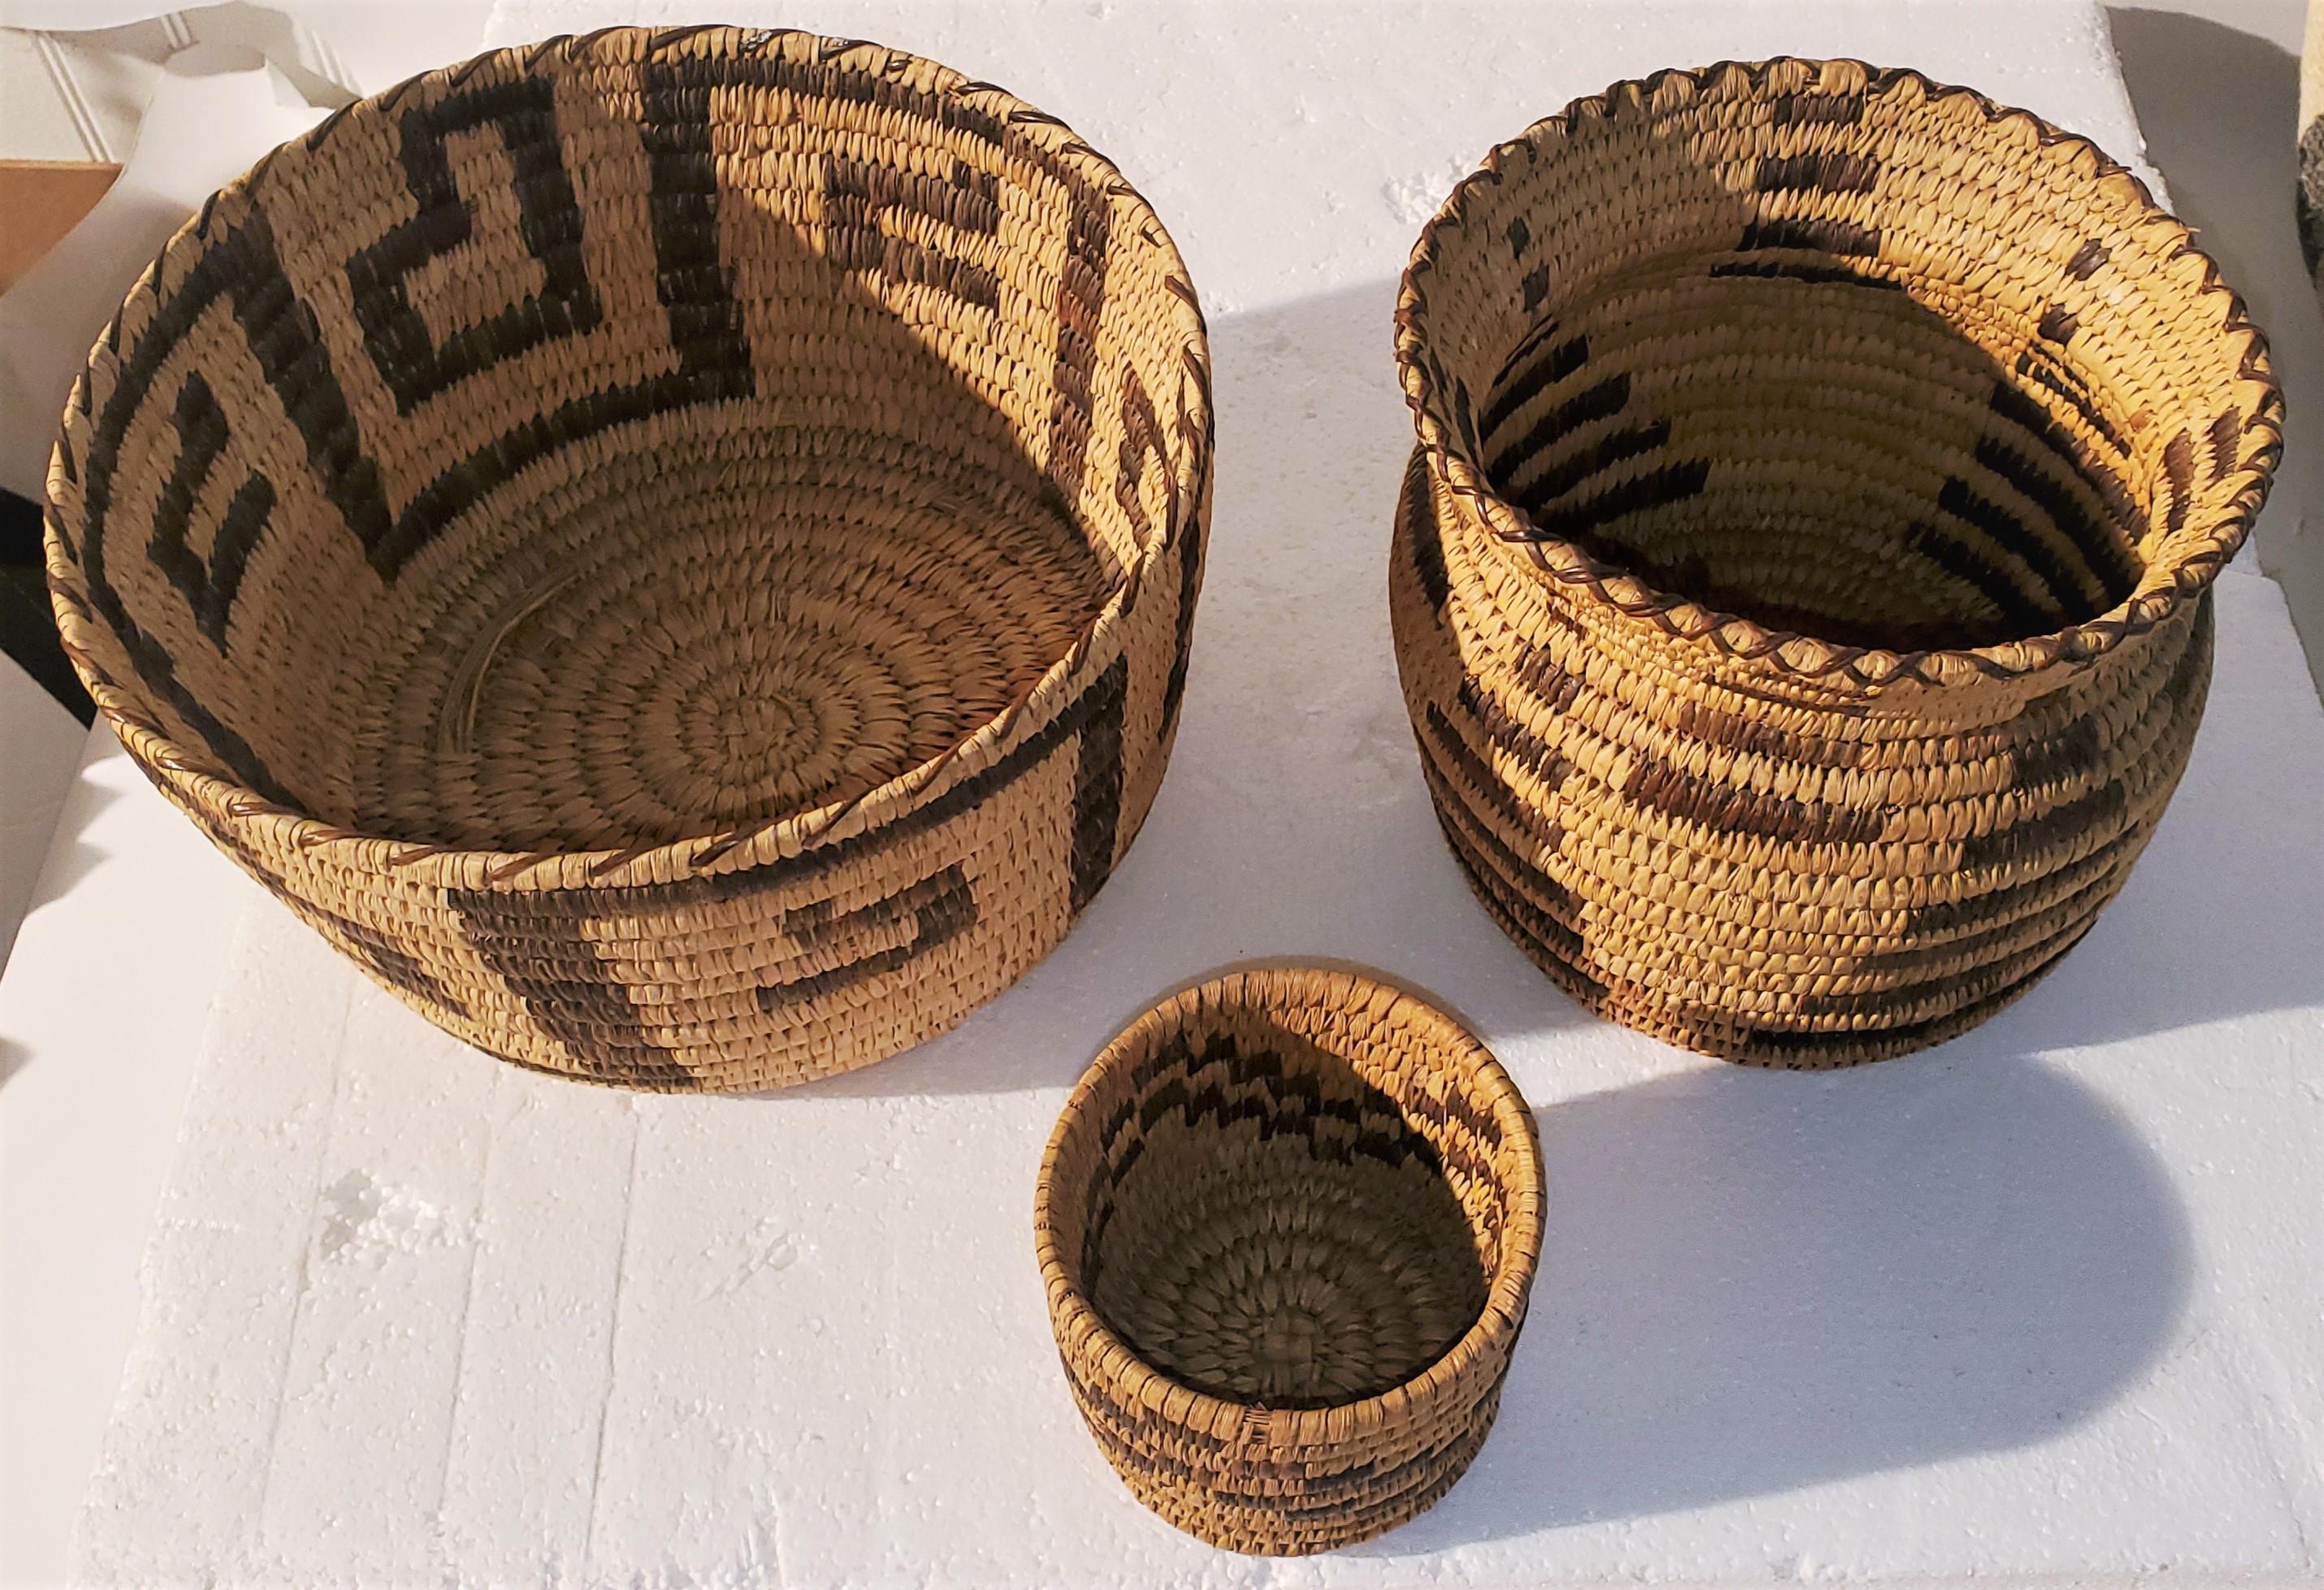 Indian baskets in fine condition. Selling as a collection.

Small Papago measures - 3 inches in diameter by 4 inches tall
large papago measures - 10 inches in diameter x 5.5 inches tall
medium papago measures - 7.5 inches in diameter x 6.5